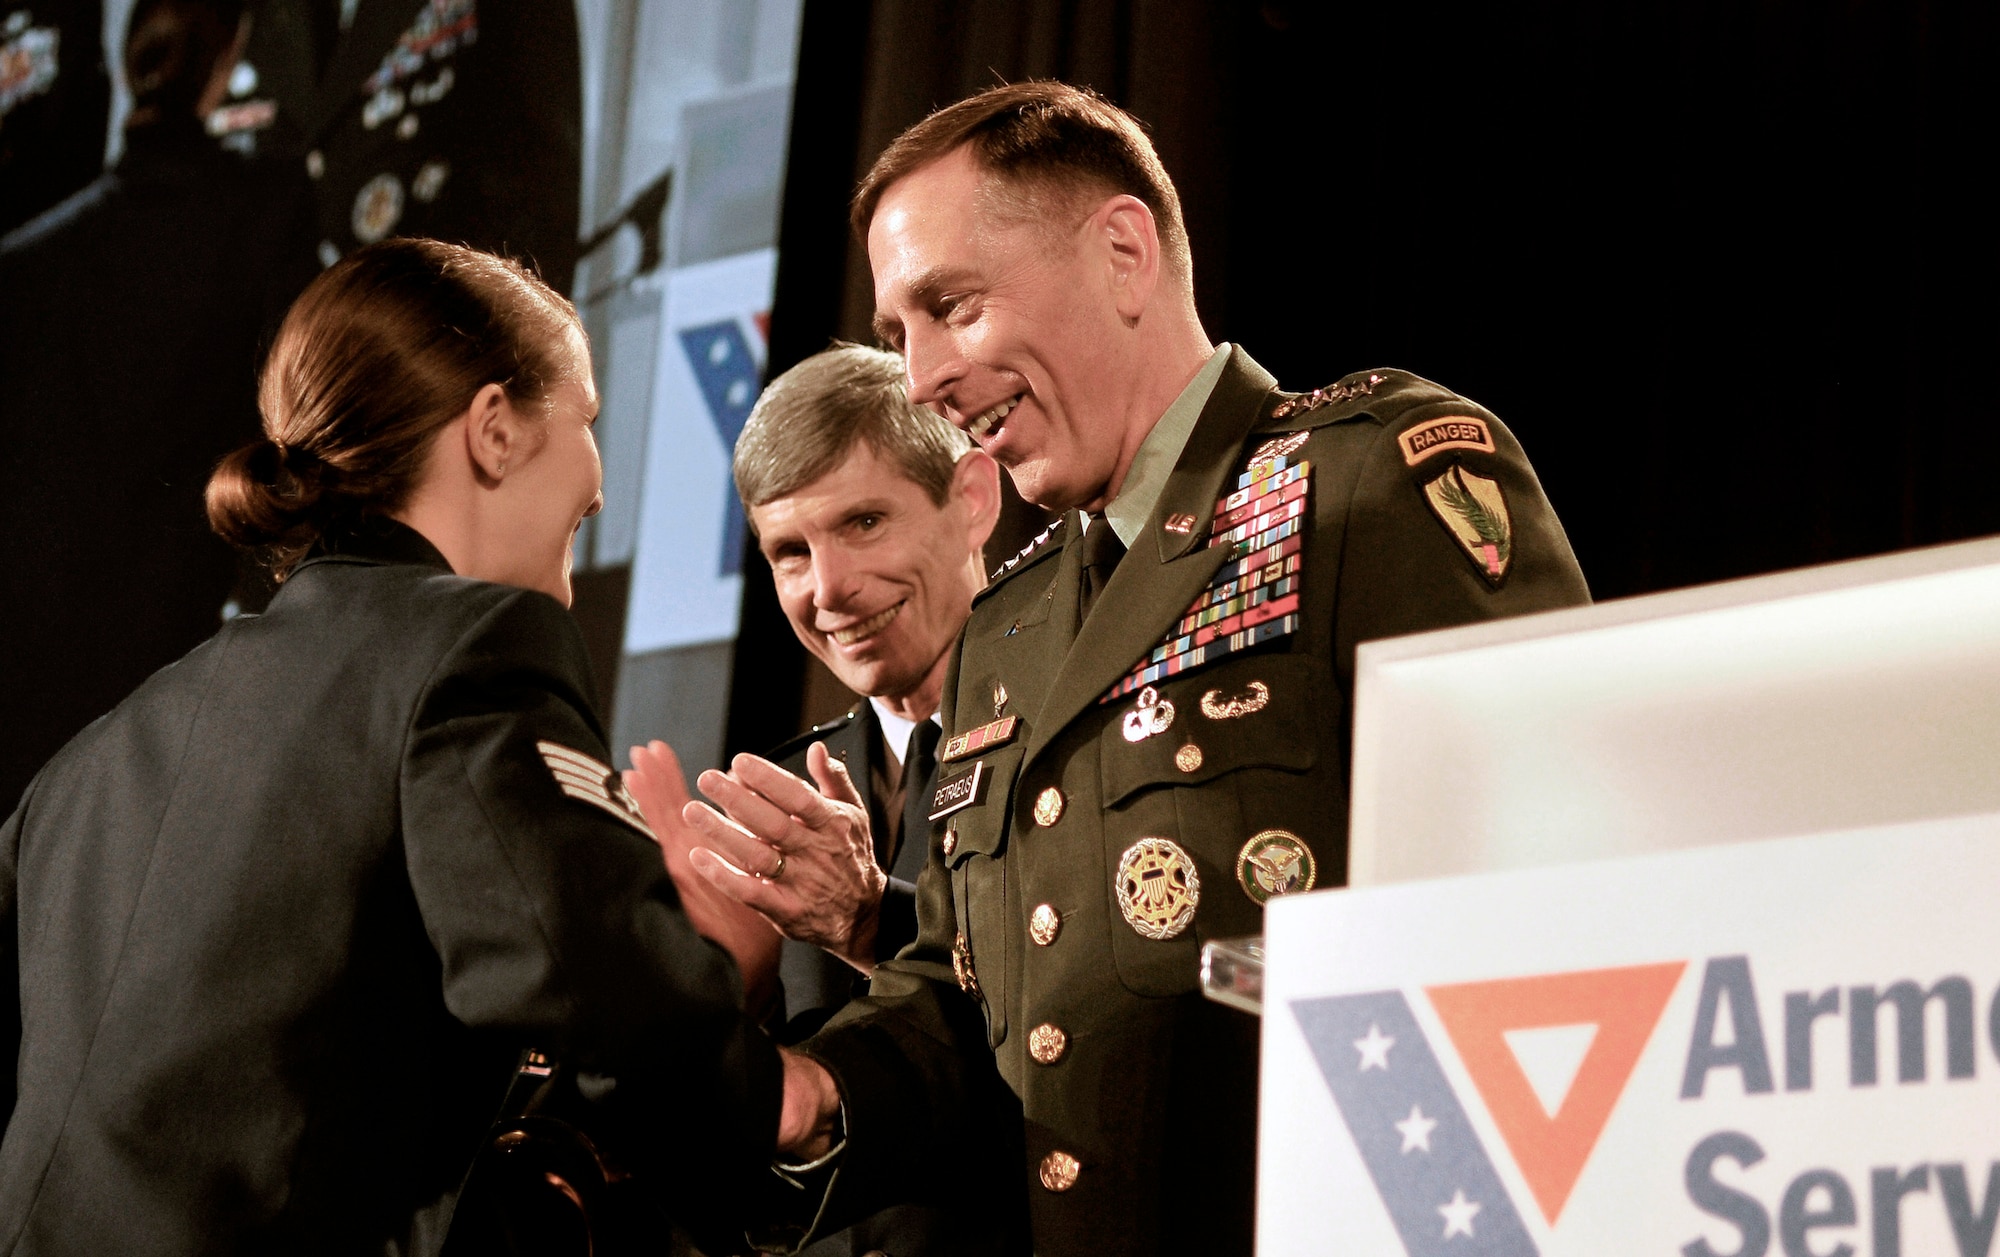 Staff Sgt. Stephanie Cates receives the Angels of the Battlefield Award from Army Gen. David Petraeus and Gen. Norton Schwartz during a dinner in honor of military medics and corpsman March 11 at the Ronald Reagan Building in Washington, D.C. General Patraeus is the commander of U.S. Central Command. General Schwartz is the Air Force chief of staff. (U.S. Air Force photo/Tech. Sgt. Suzanne M. Day) 
